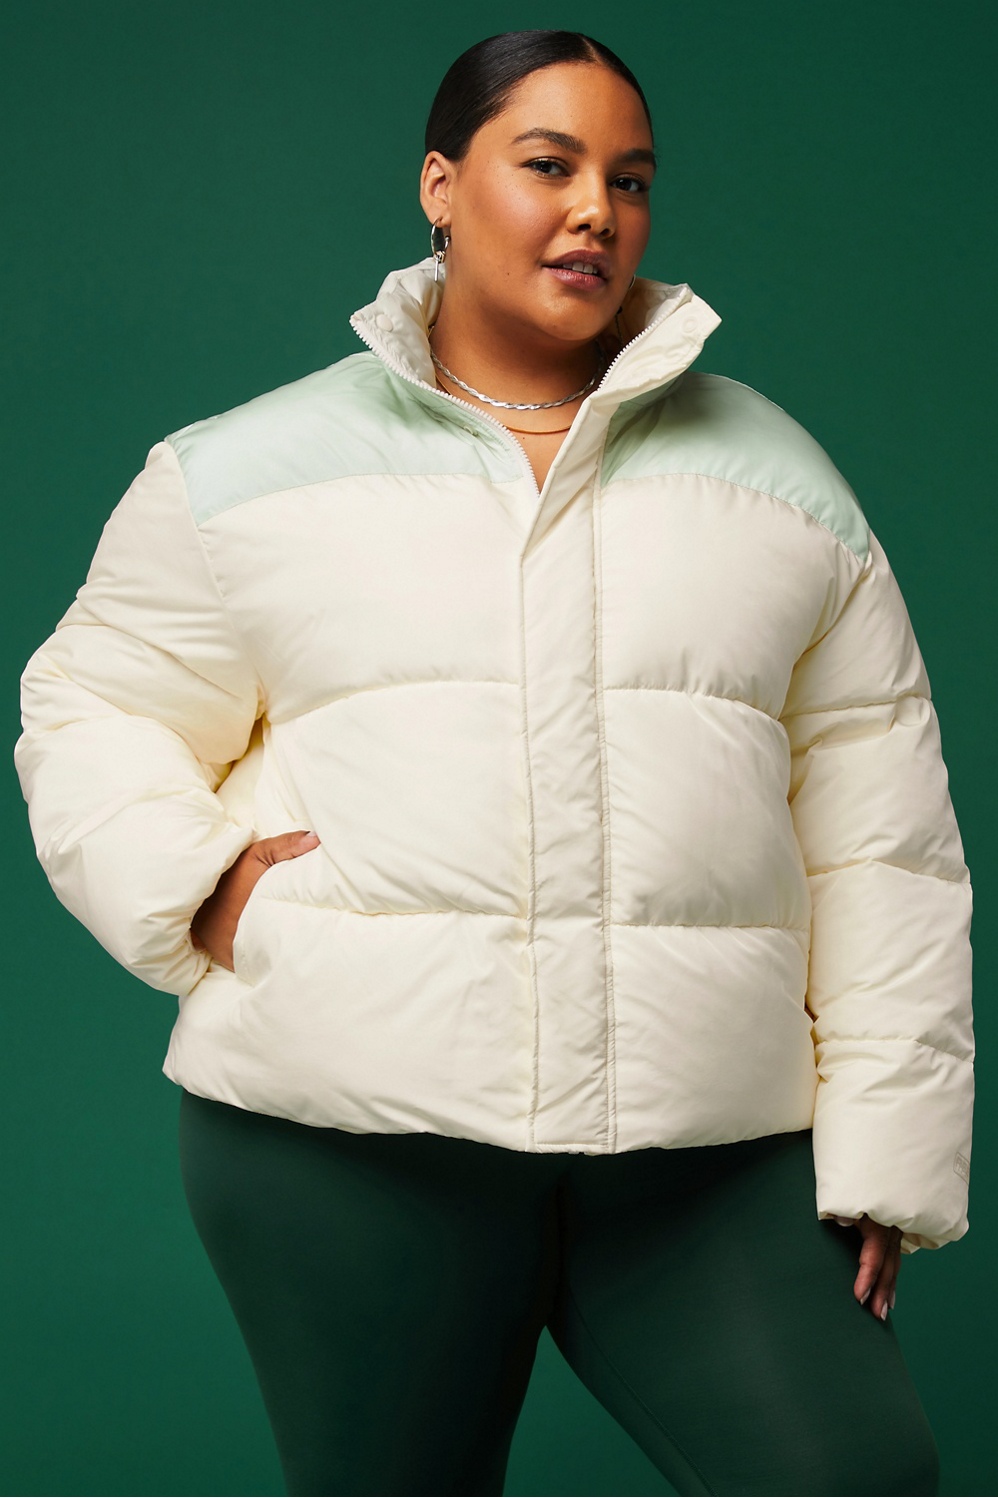 Fabletics Shiny Black Puffer Jacket - $50 (57% Off Retail) New With Tags -  From Emily